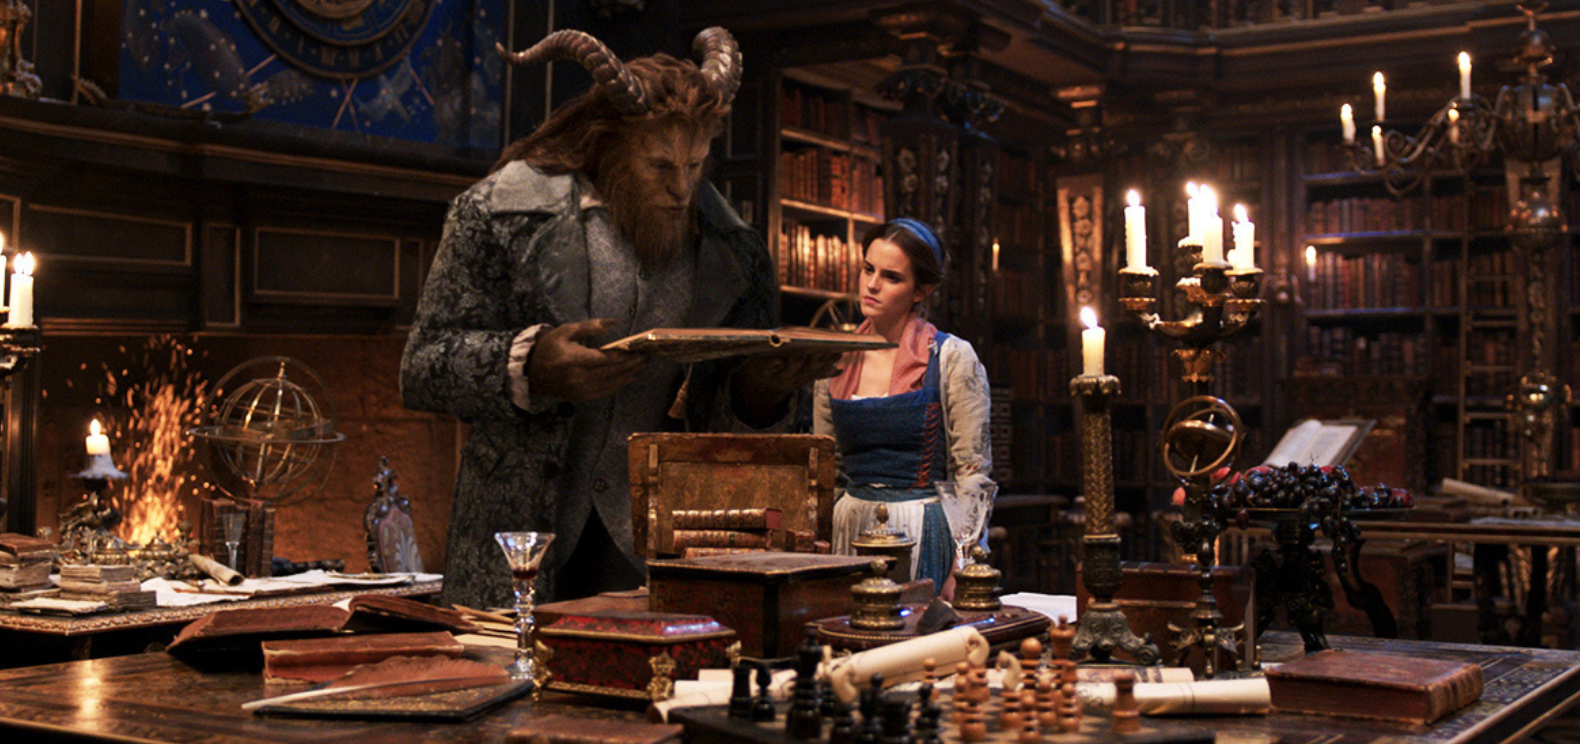 “Beauty and the Beast” invites you to “Be [Their] Guest”